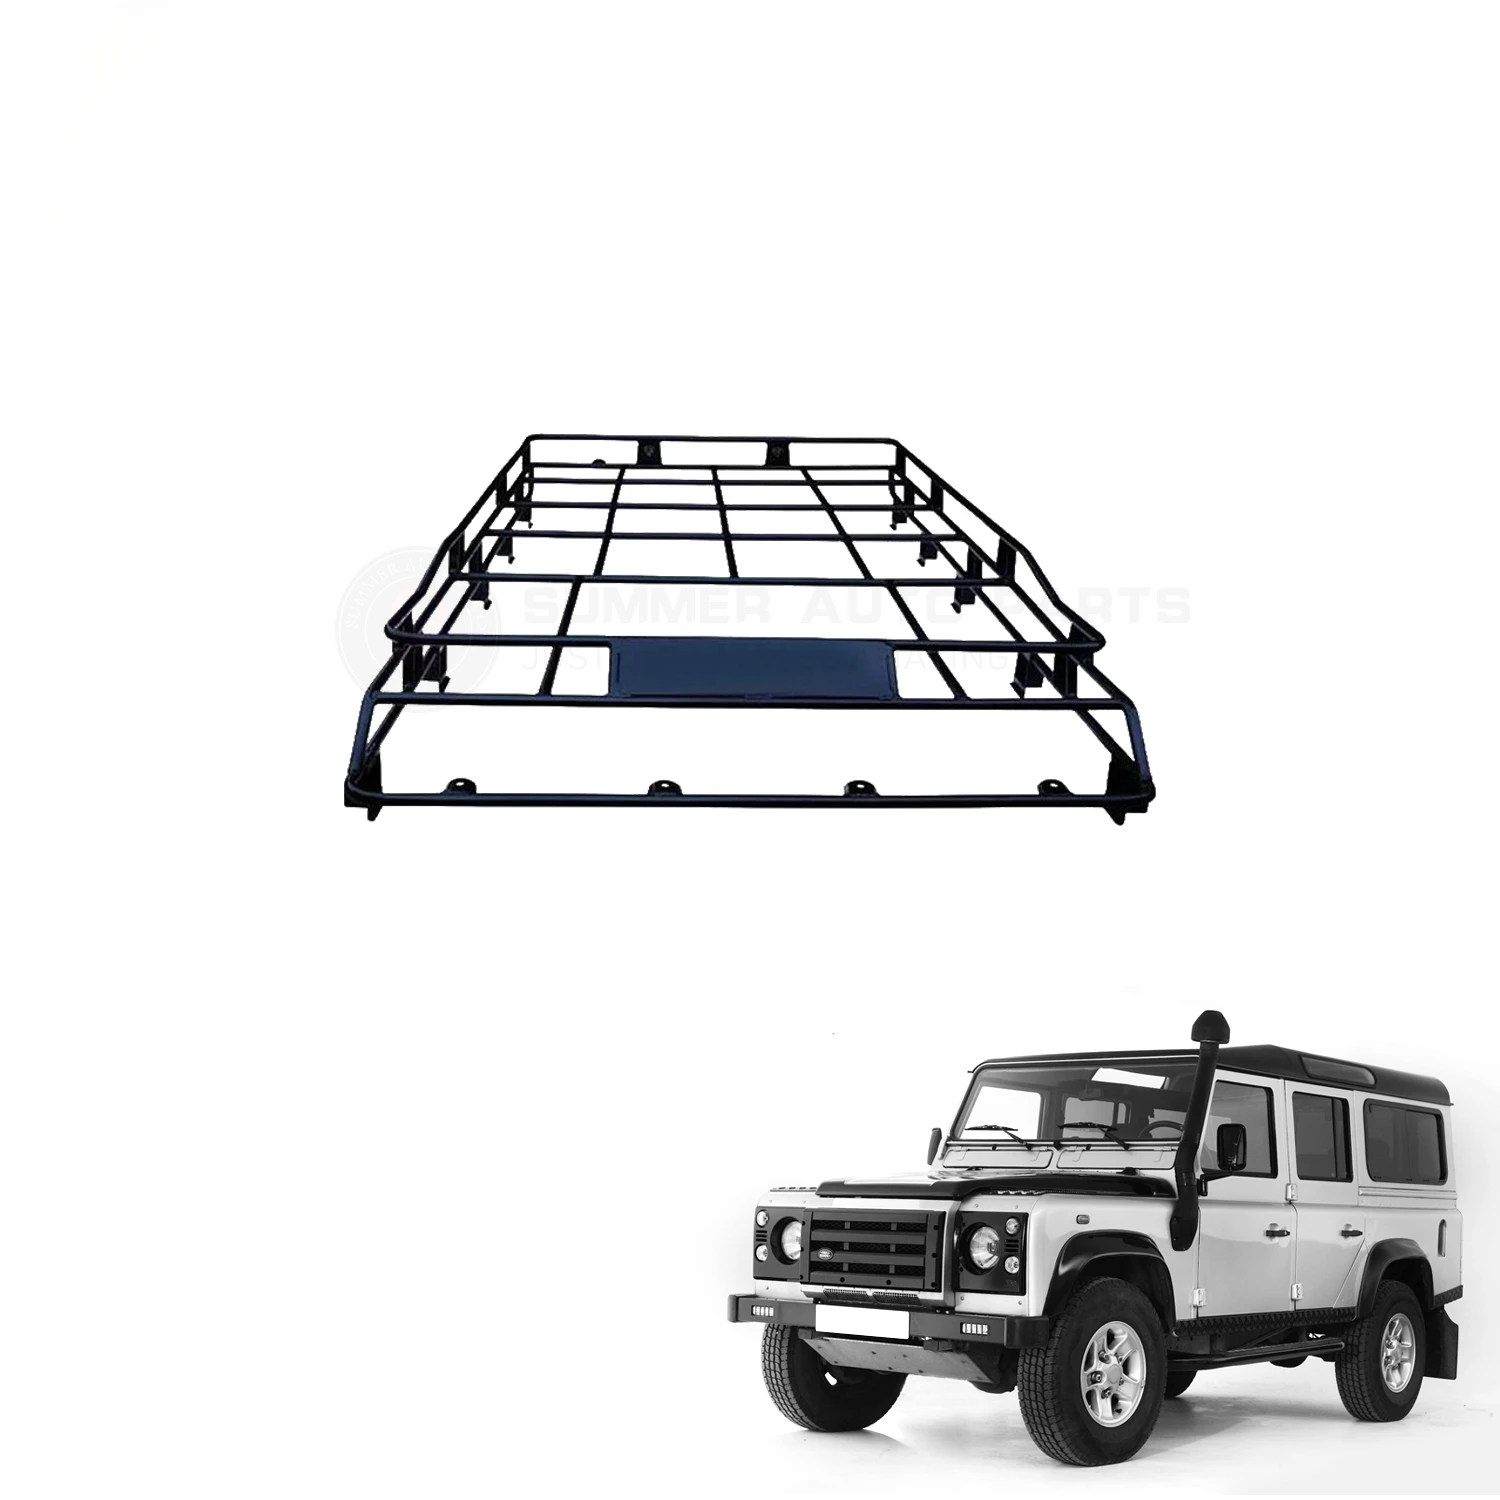 DEF4X4 Luggage Roof Rack Exterior Accessories For Classic Defendercustom luggage roof rack cargo carrier for jeep jl accessories shanghai